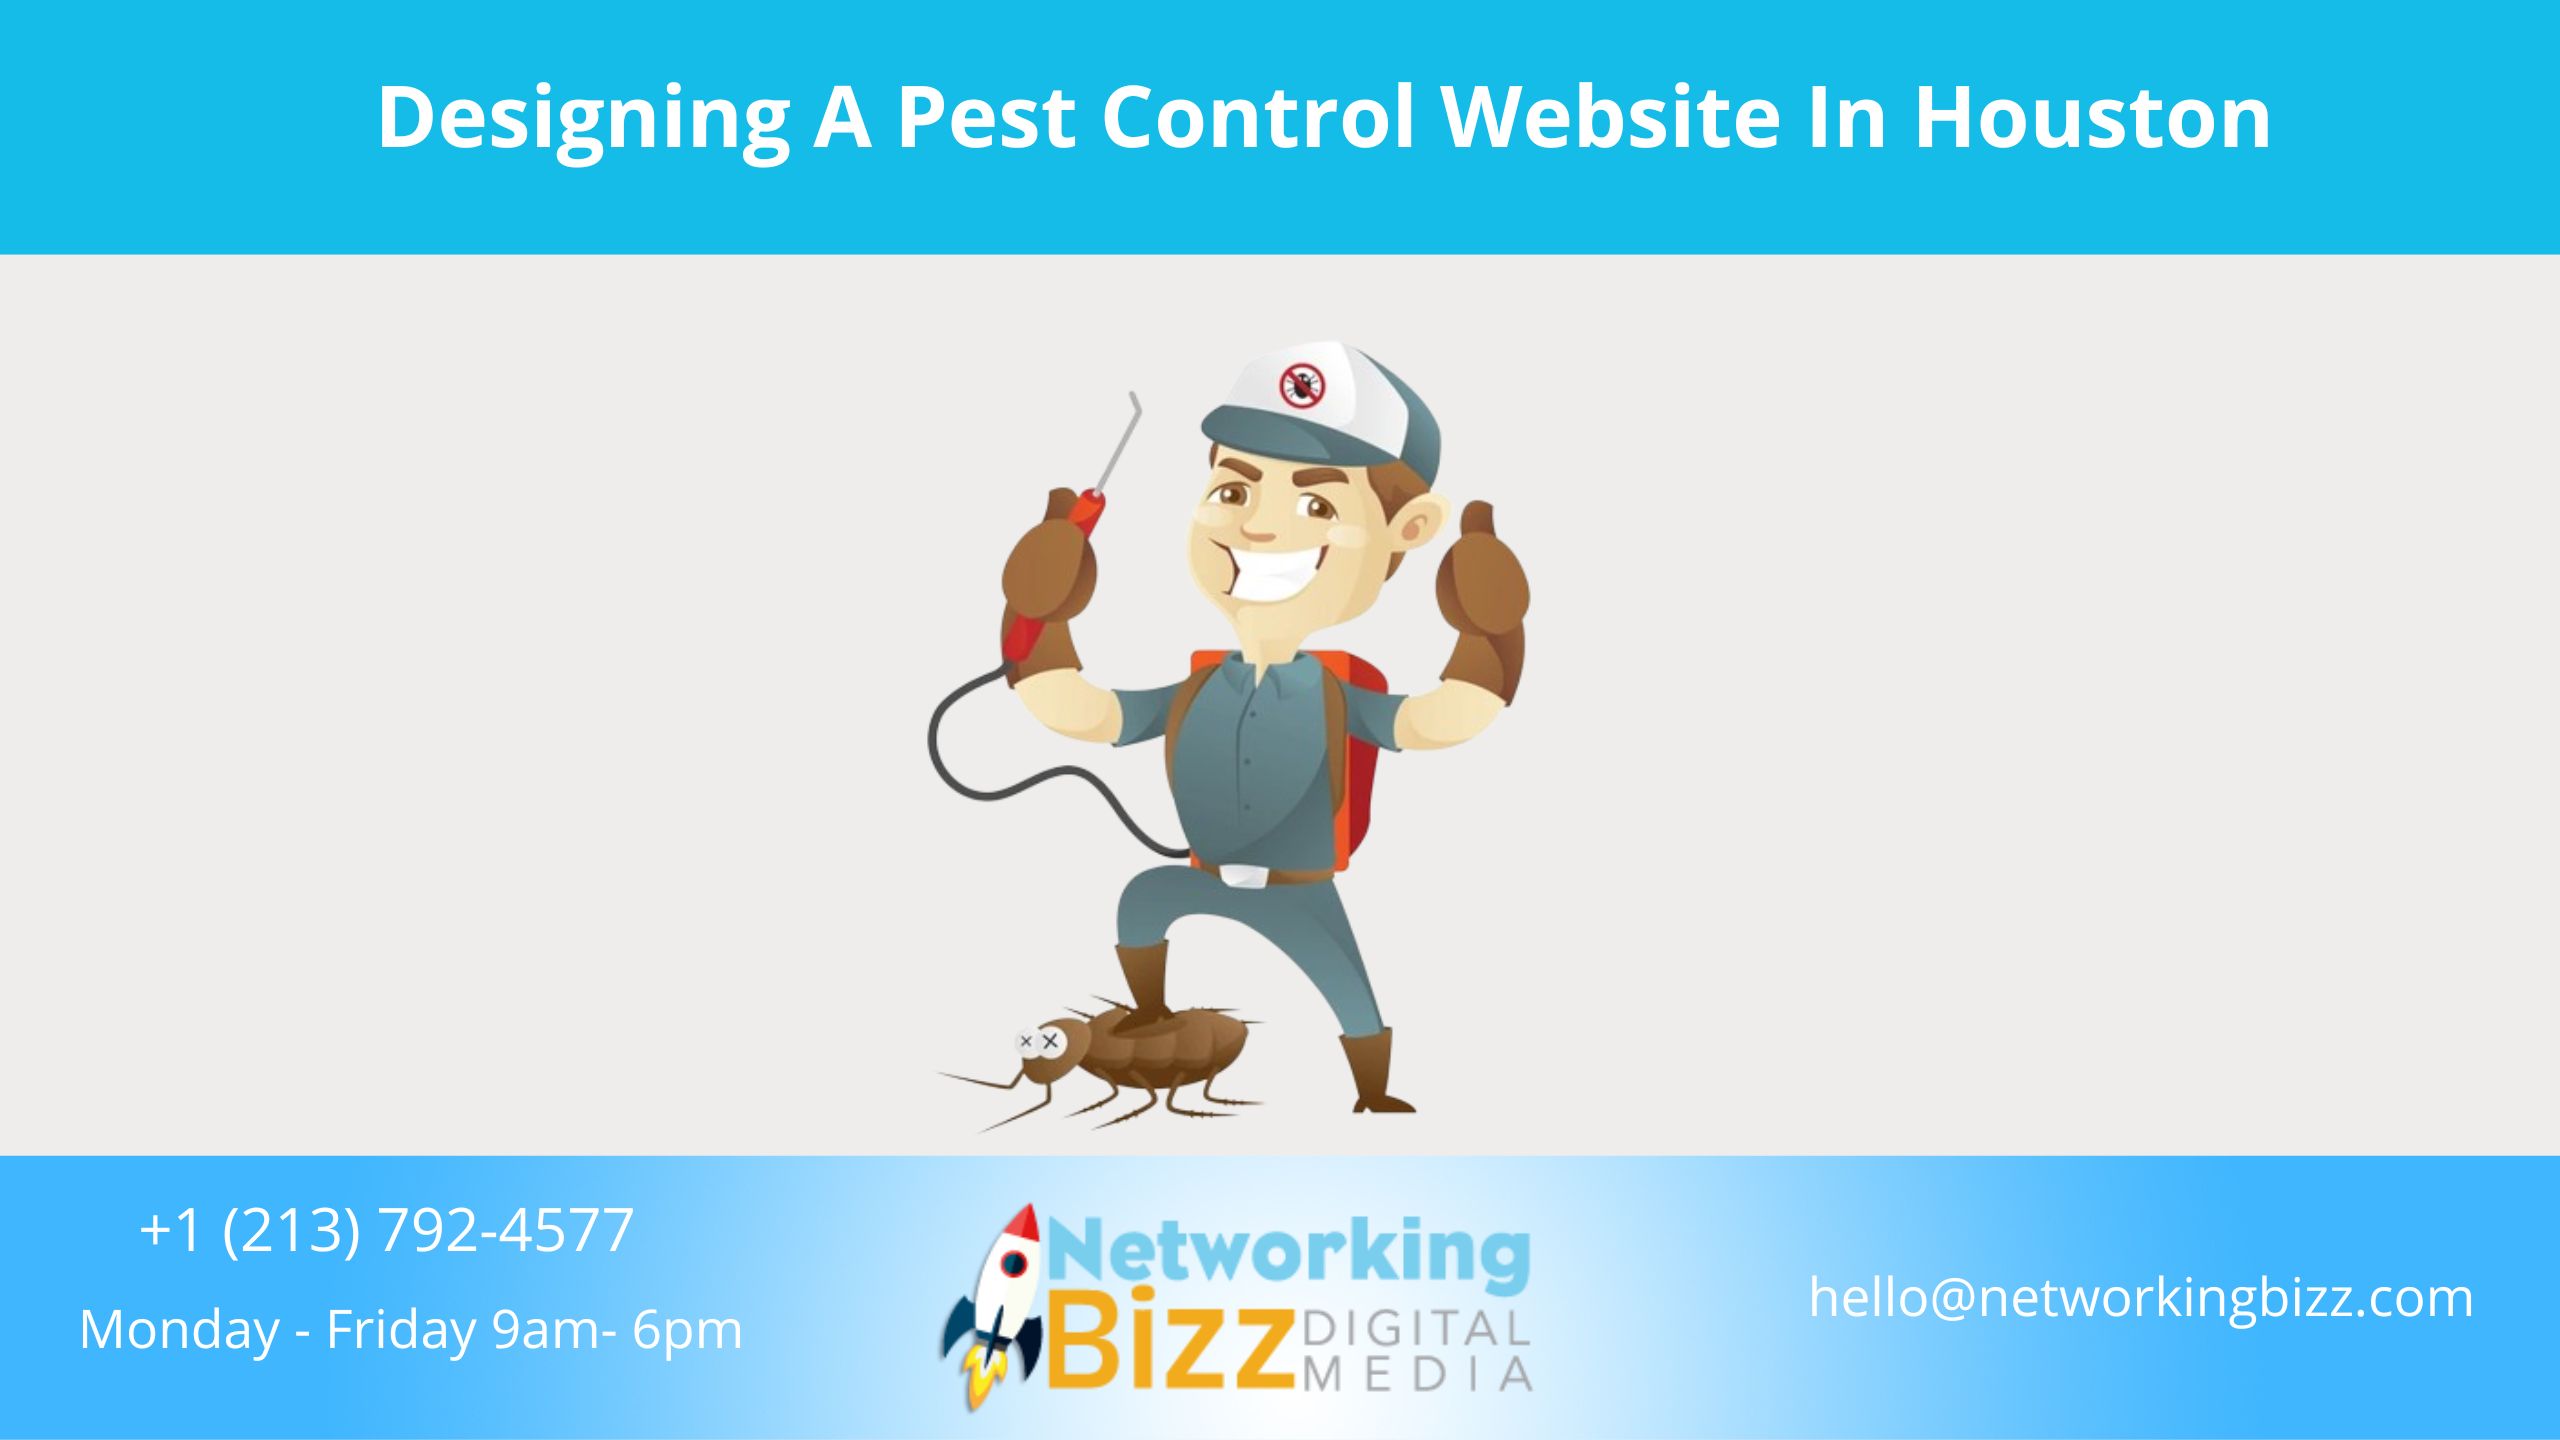 Designing A Pest Control Website In Houston